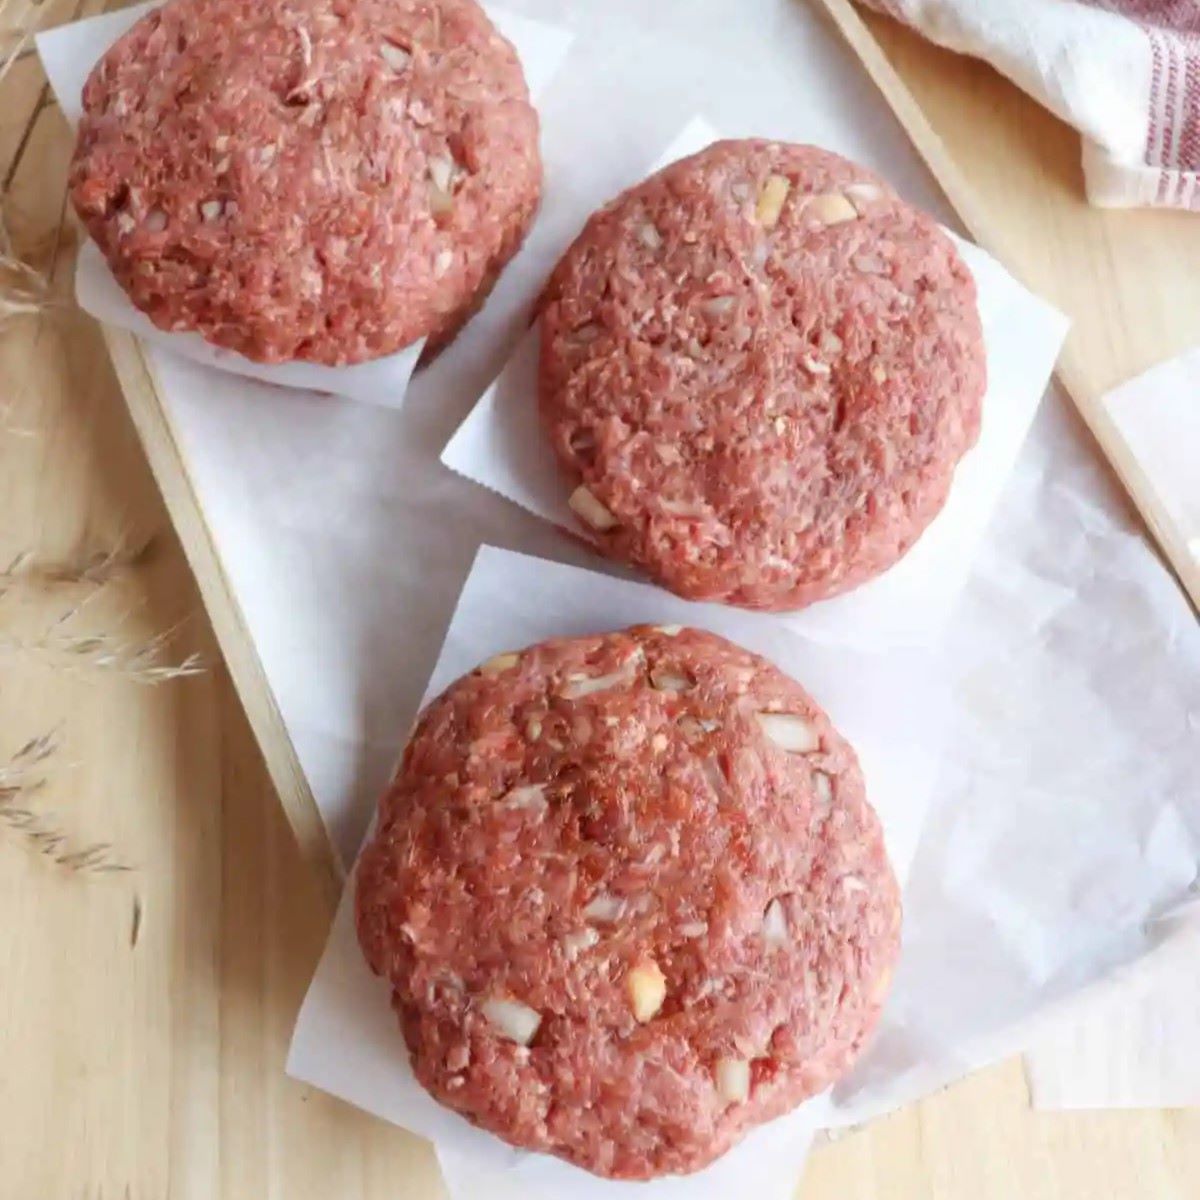 How To Store Burger Patties